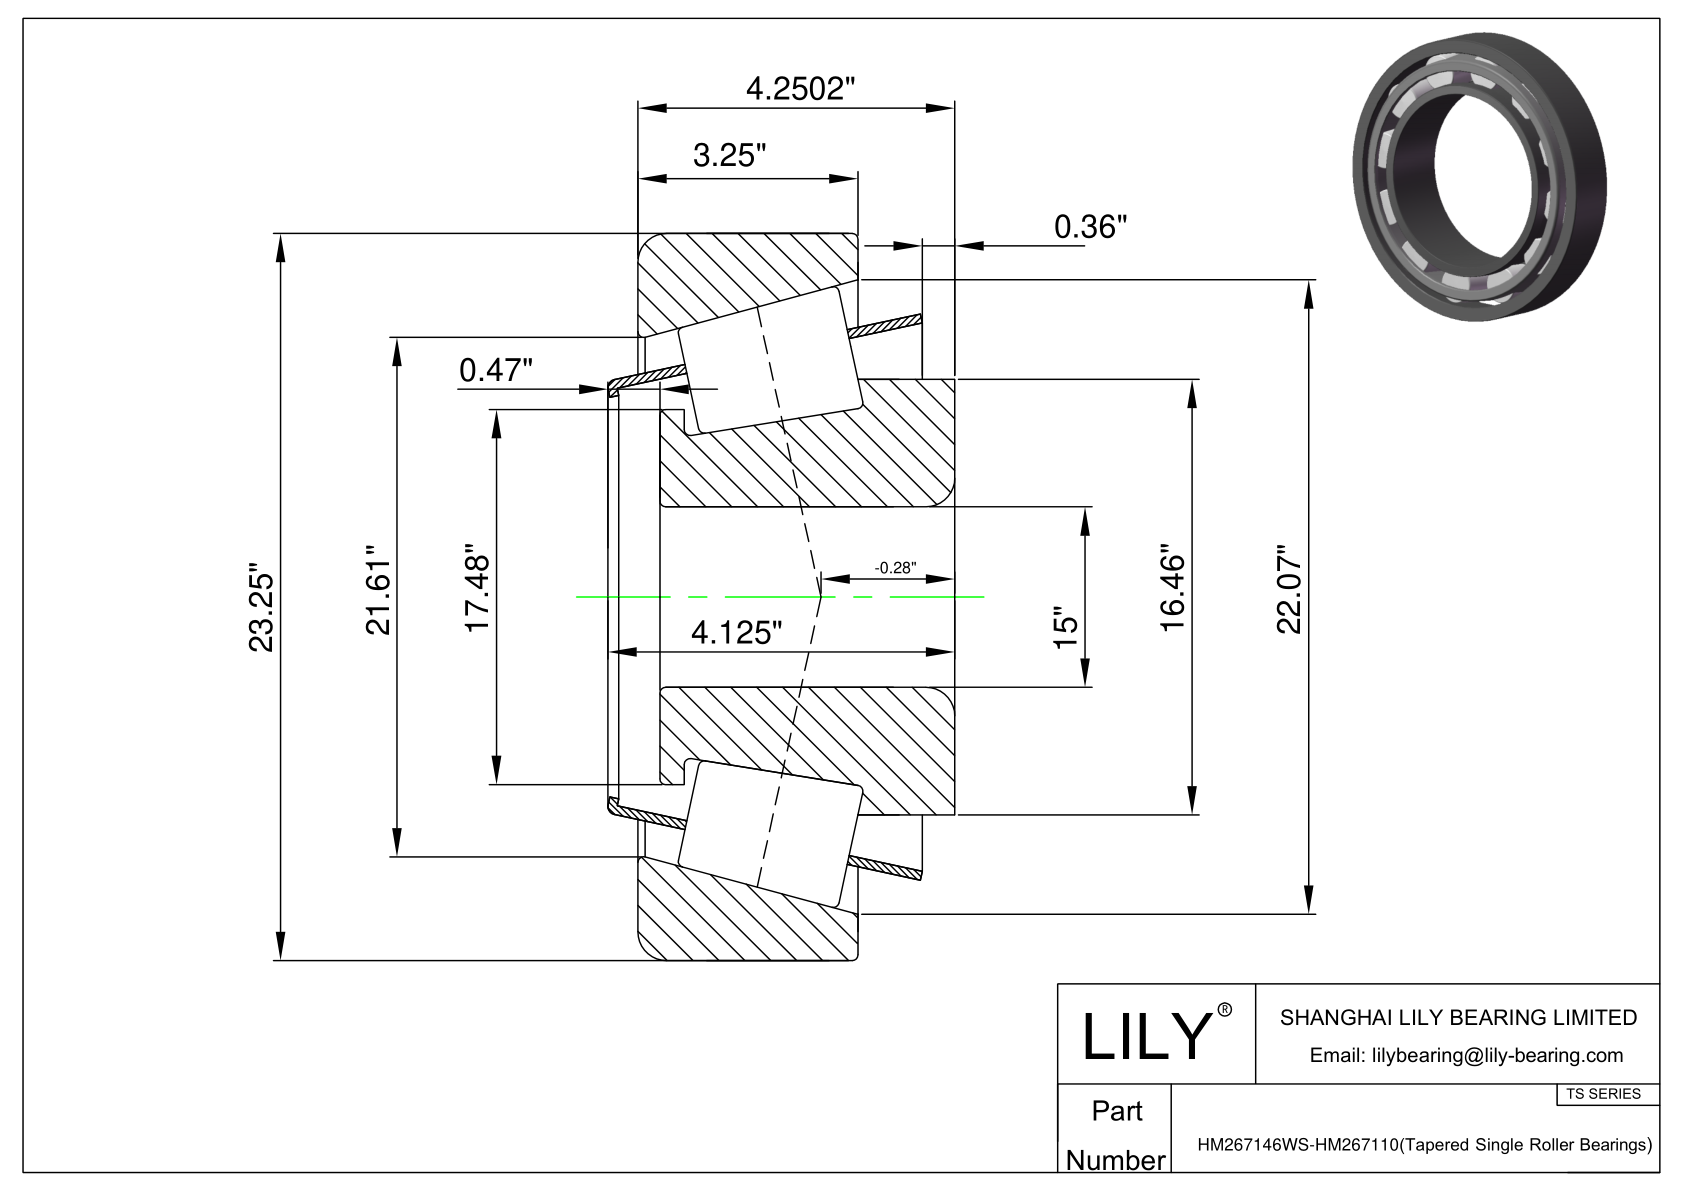 HM267146WS-HM267110 TS (Tapered Single Roller Bearings) (Imperial) cad drawing